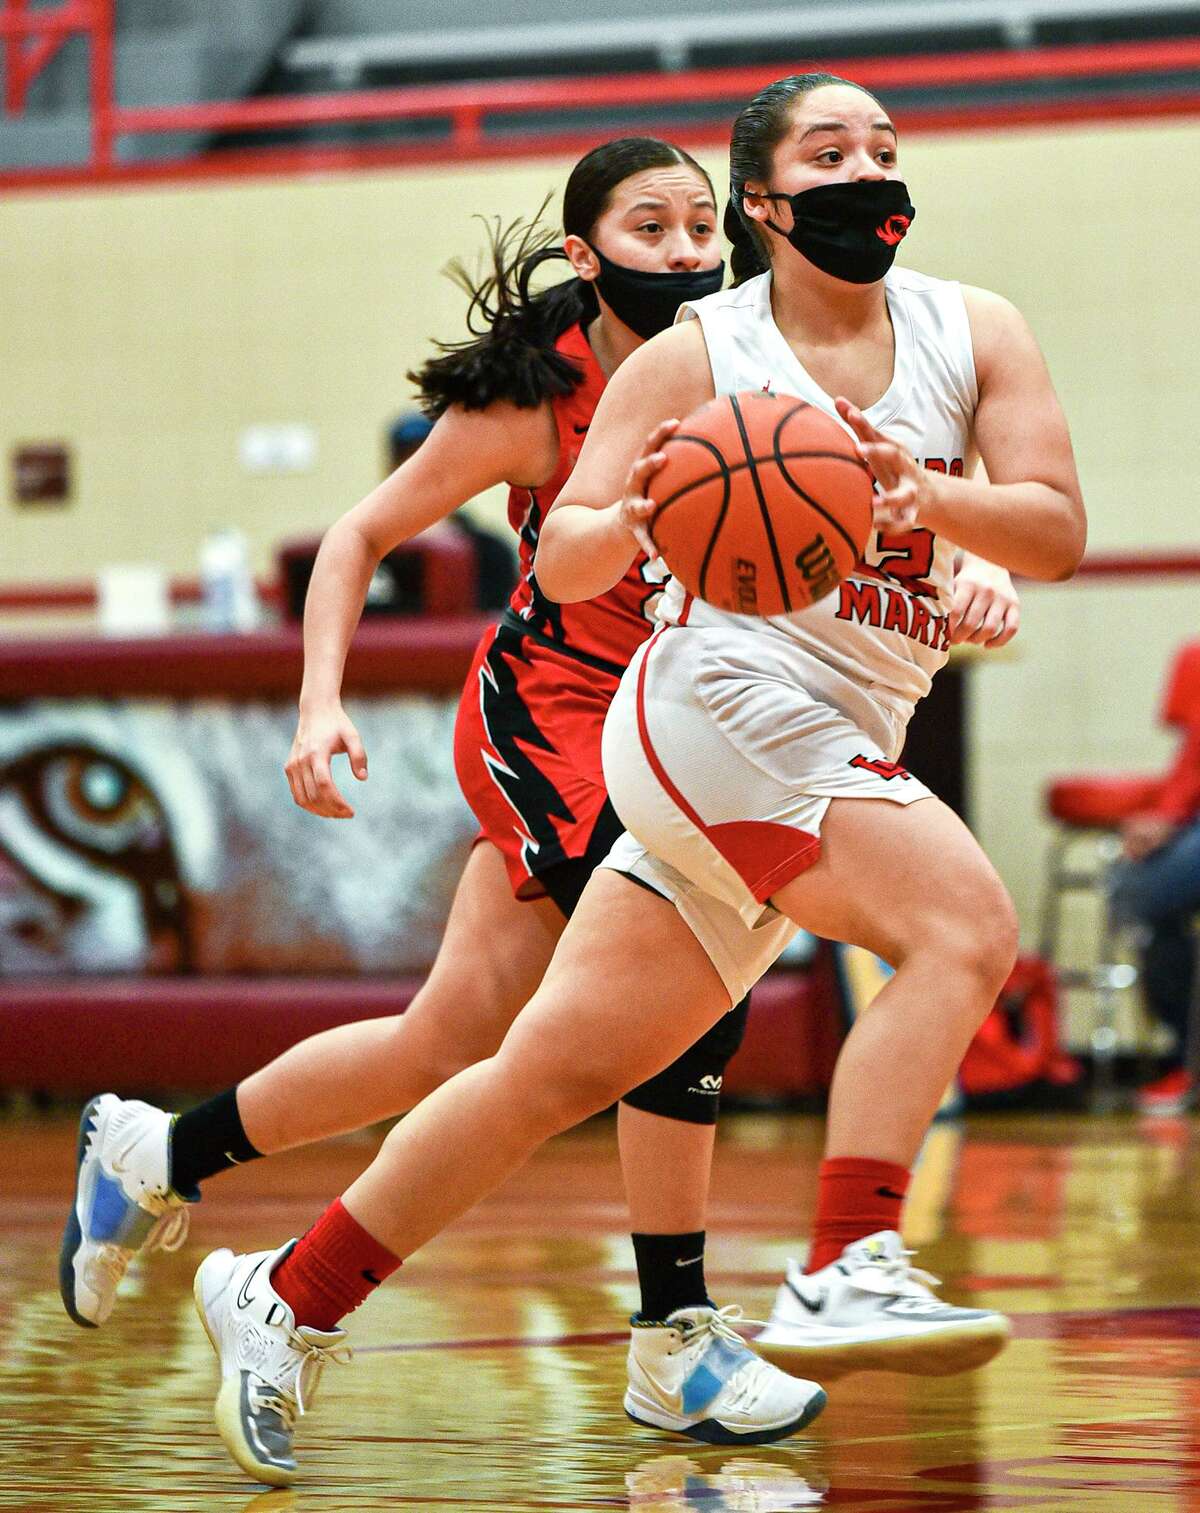 Martin High School Jari Garcia moves the ball down the court during a game against Rio Grande City High School Rattlers, Tuesday, Jan. 19, 2021, at Martin High School.